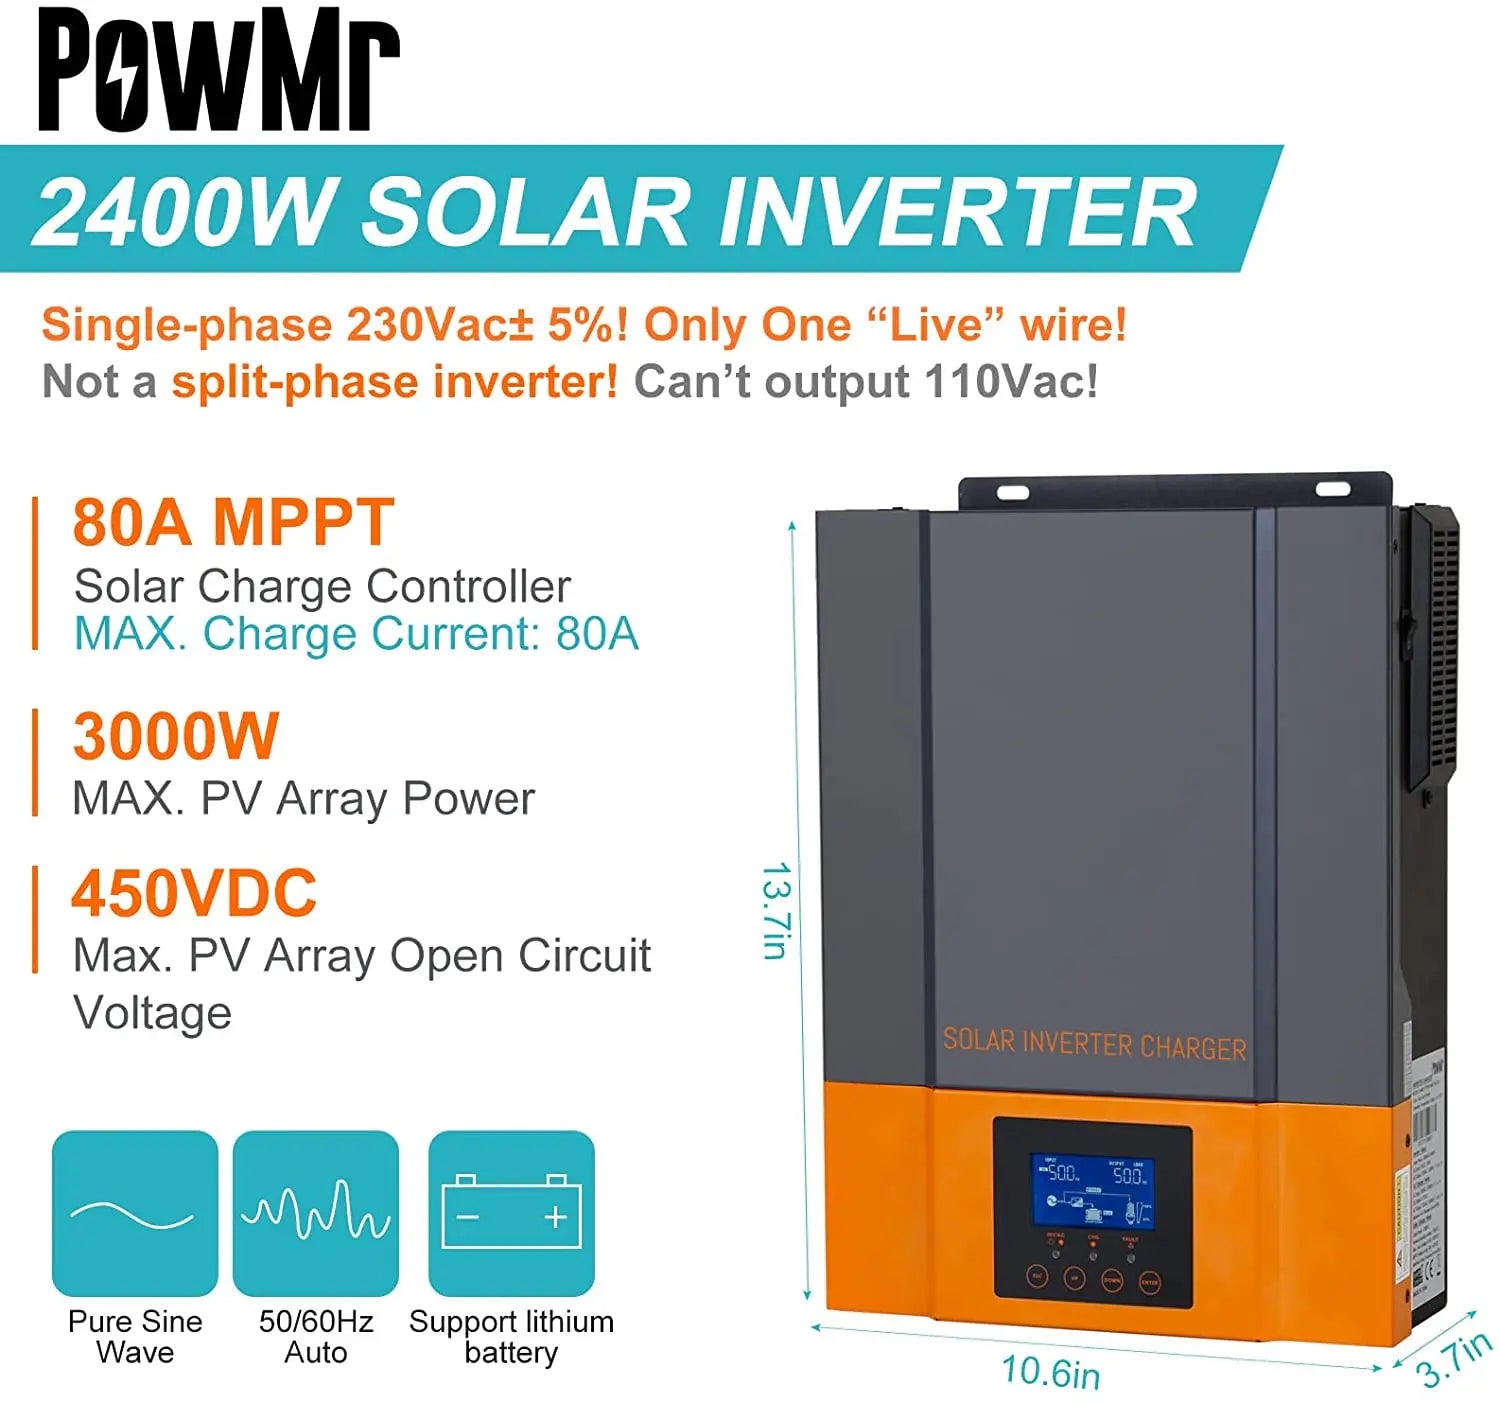 PowMr Hybrid Solar Inverter: 1.5kW single-phase inverter for AC output, features MPPT solar controller and pure sine wave output.